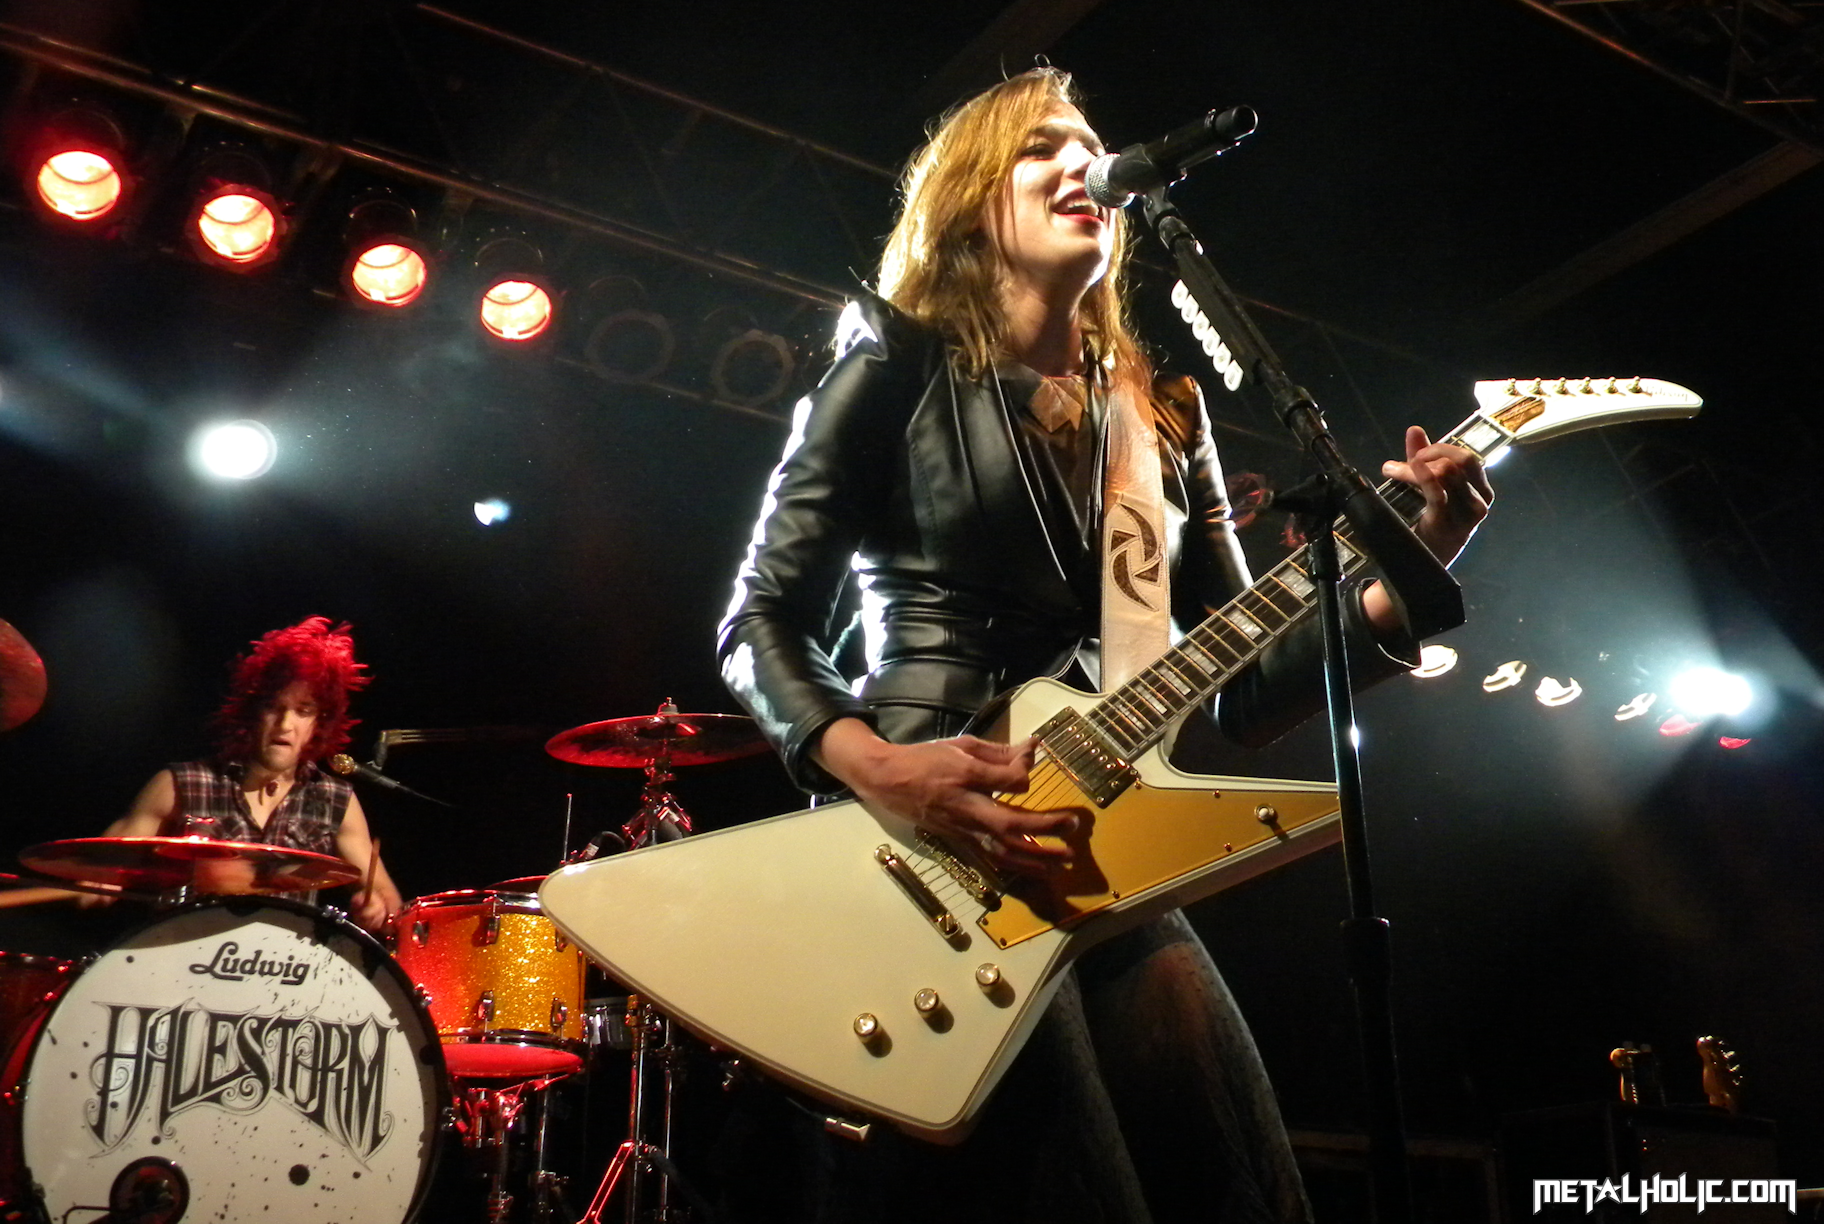 Free Download Lzzy Hale Photo 36931820 1824x1224 For Your.